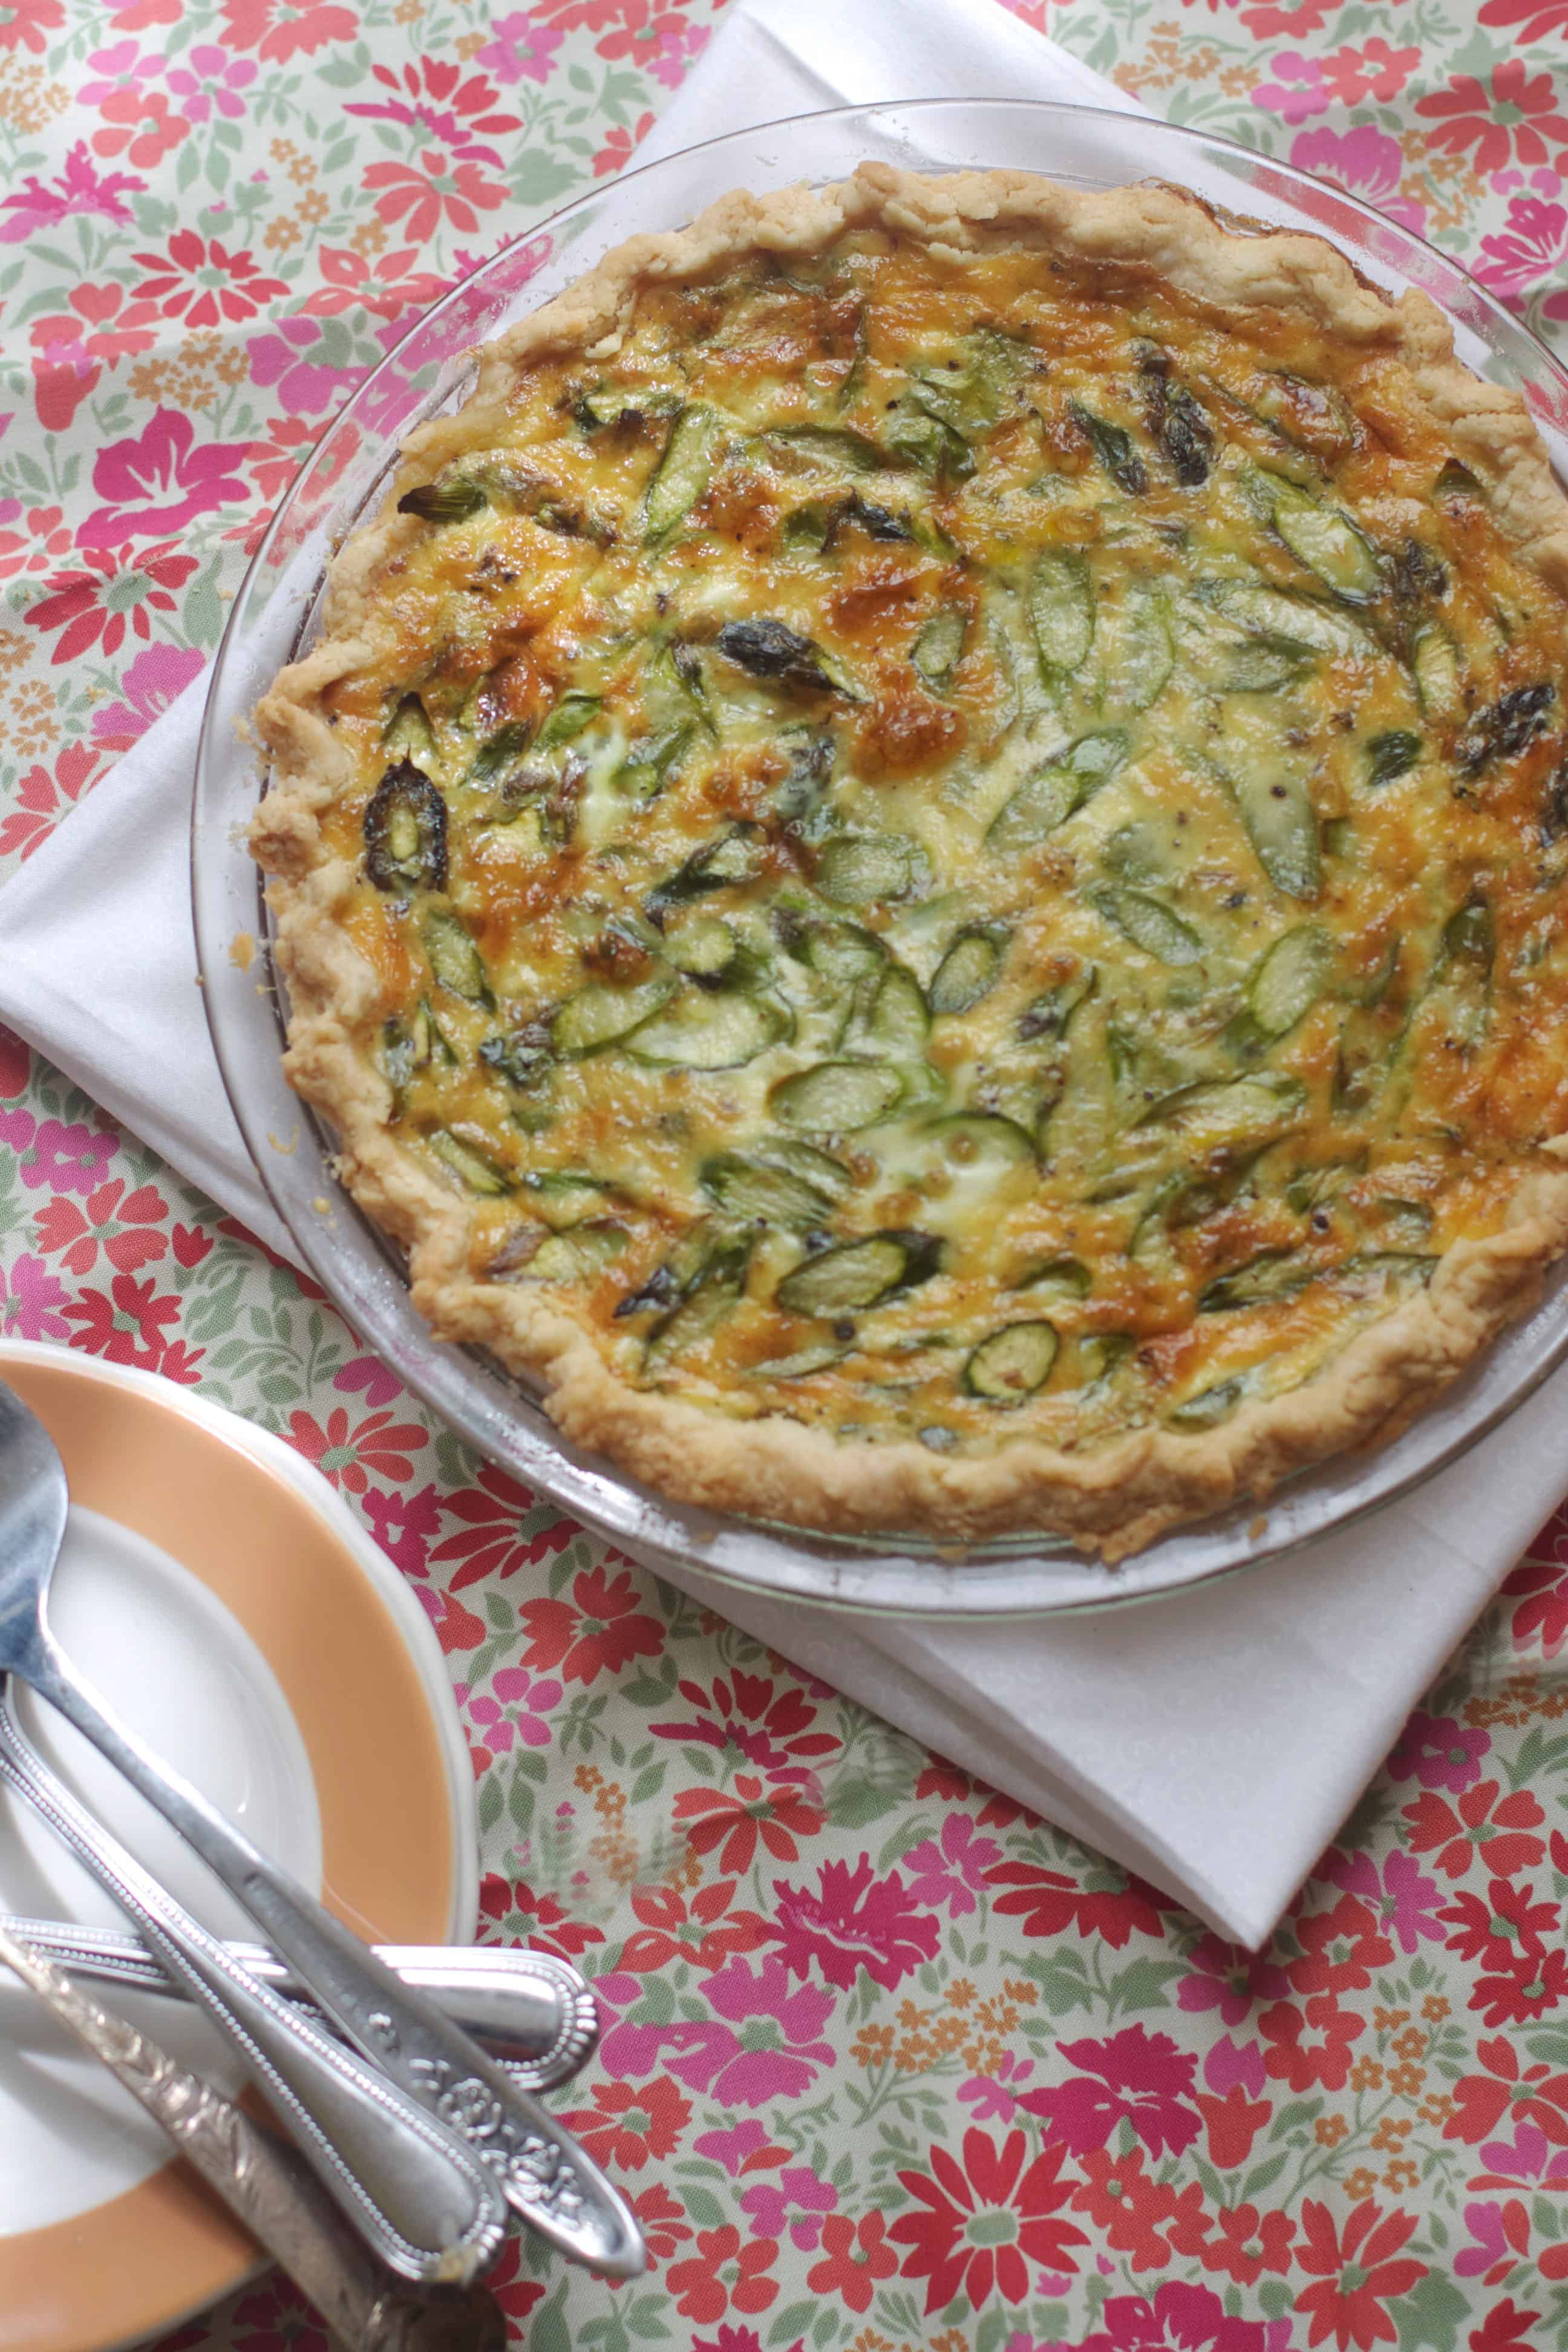 Spring Asparagus Quiche with Leeks and Gruyere